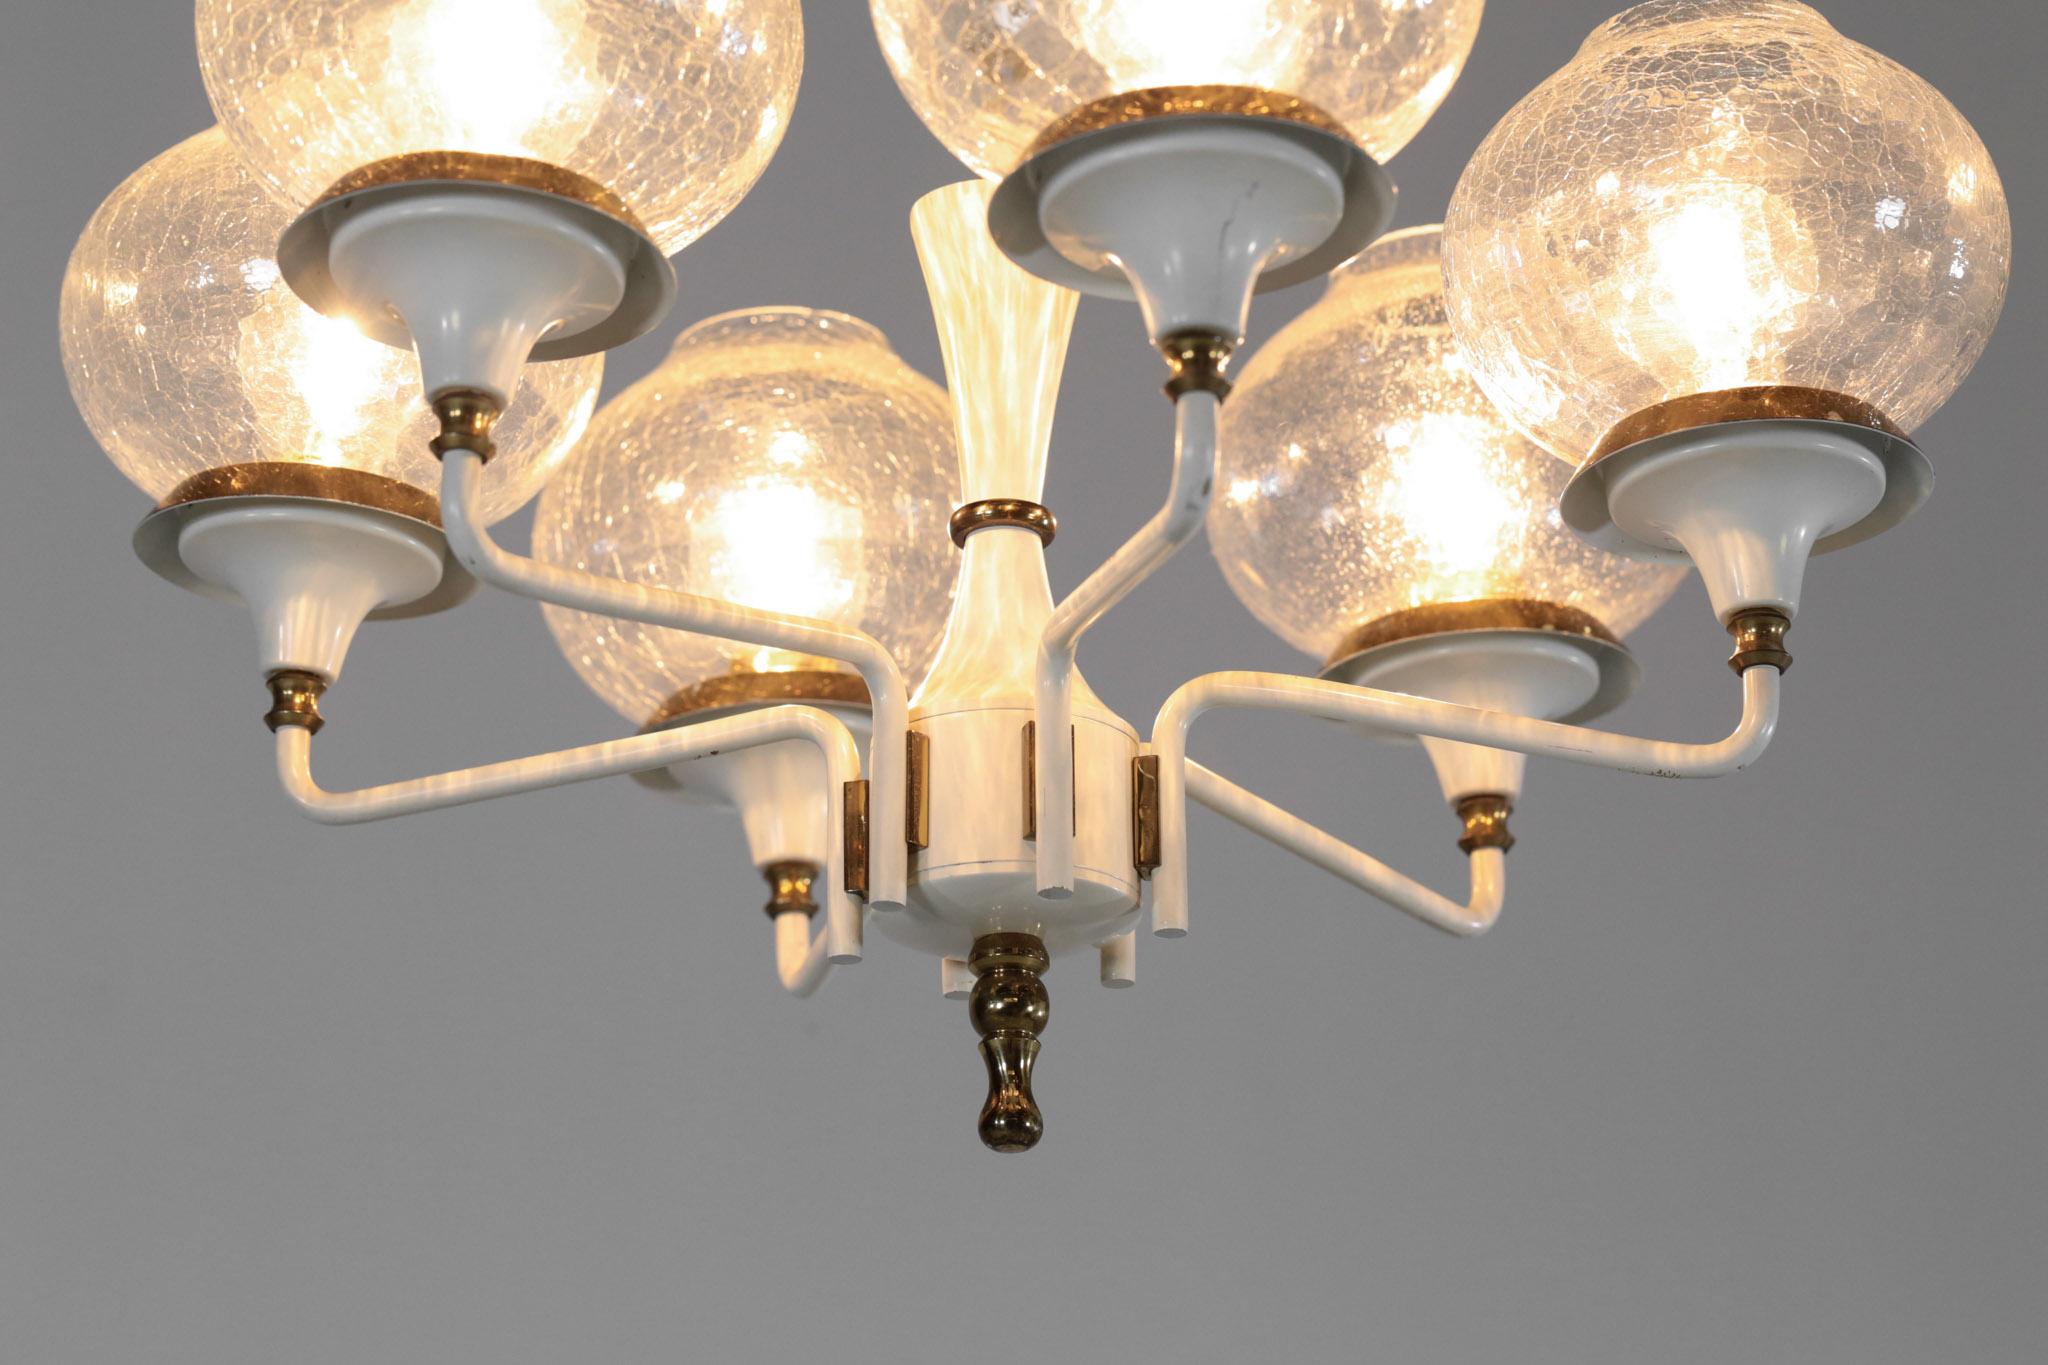 20th Century Midcentury Pendant Brass and Glass Scandinavian in Style of Hans Age Jakobsson